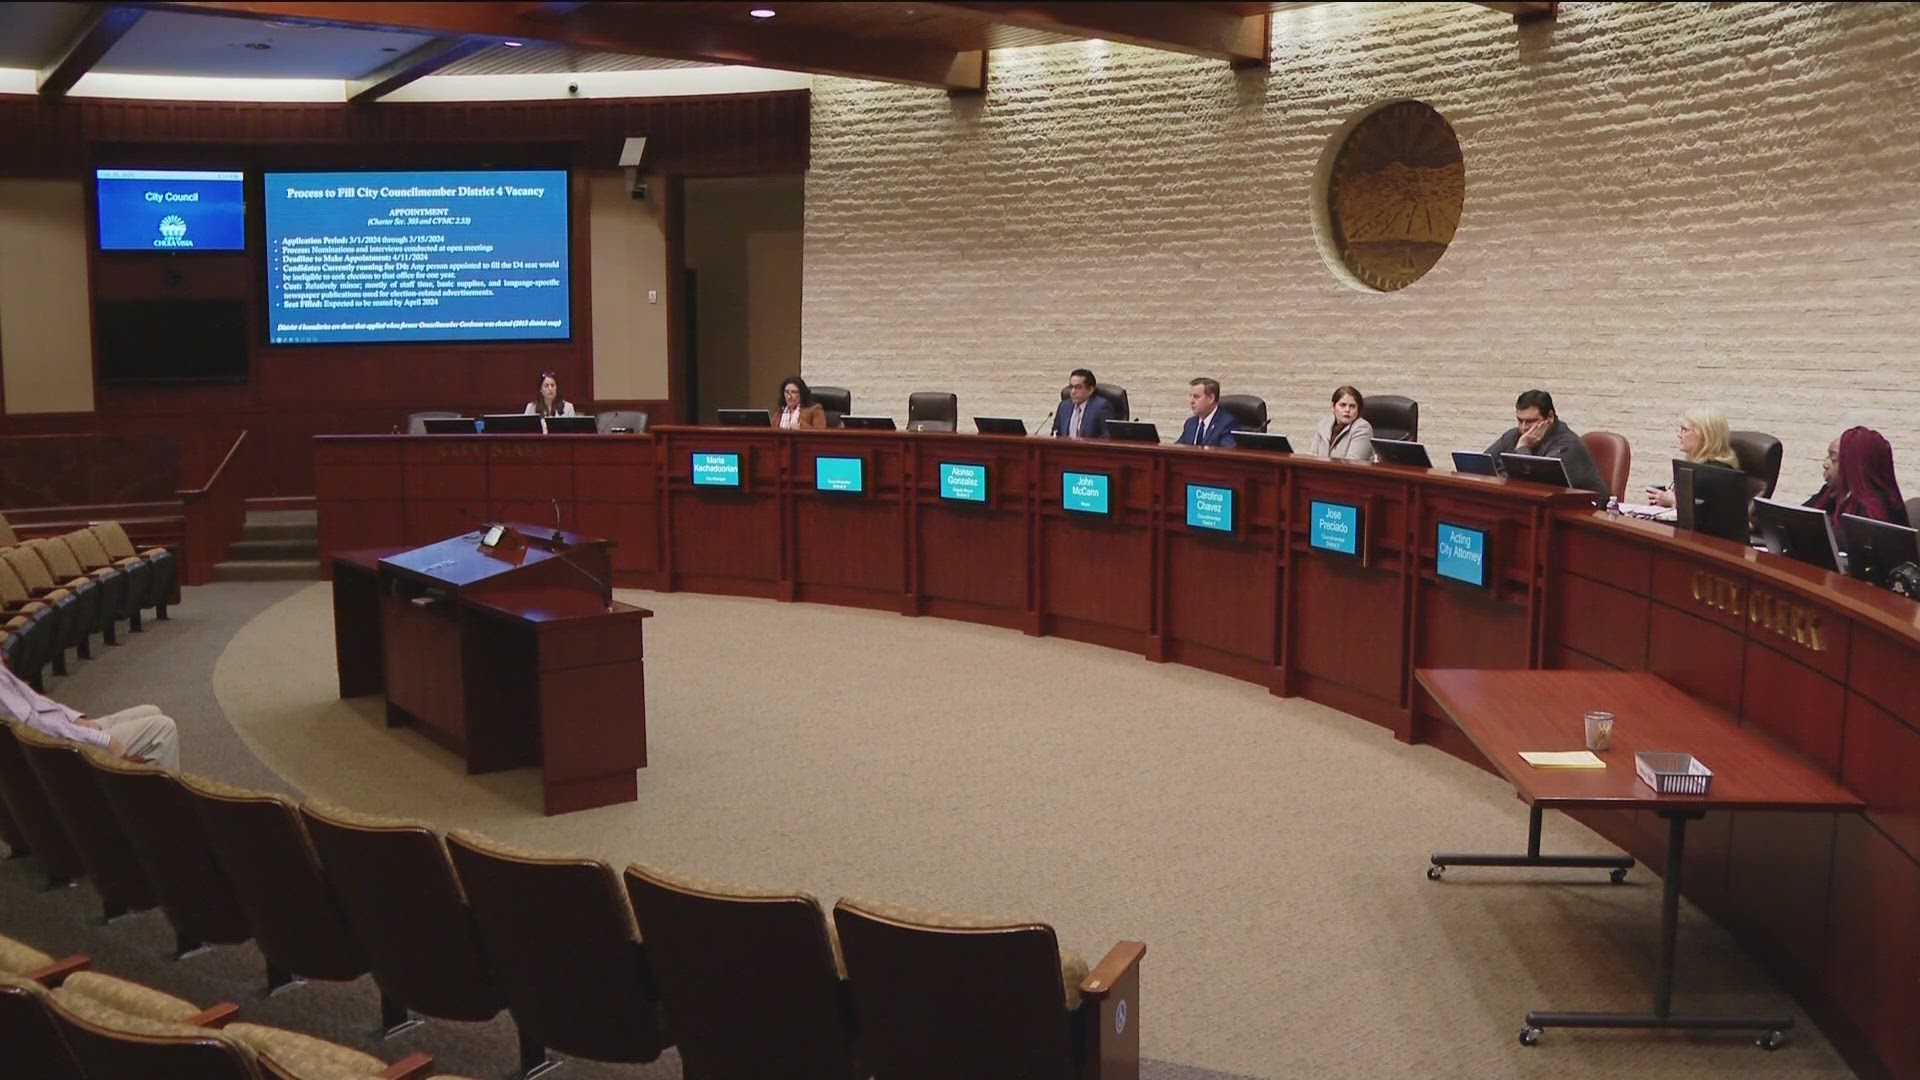 Chula Vista held a special council meeting Monday night to move forward with appointing a city council member following Andrea Cardenas' resignation.